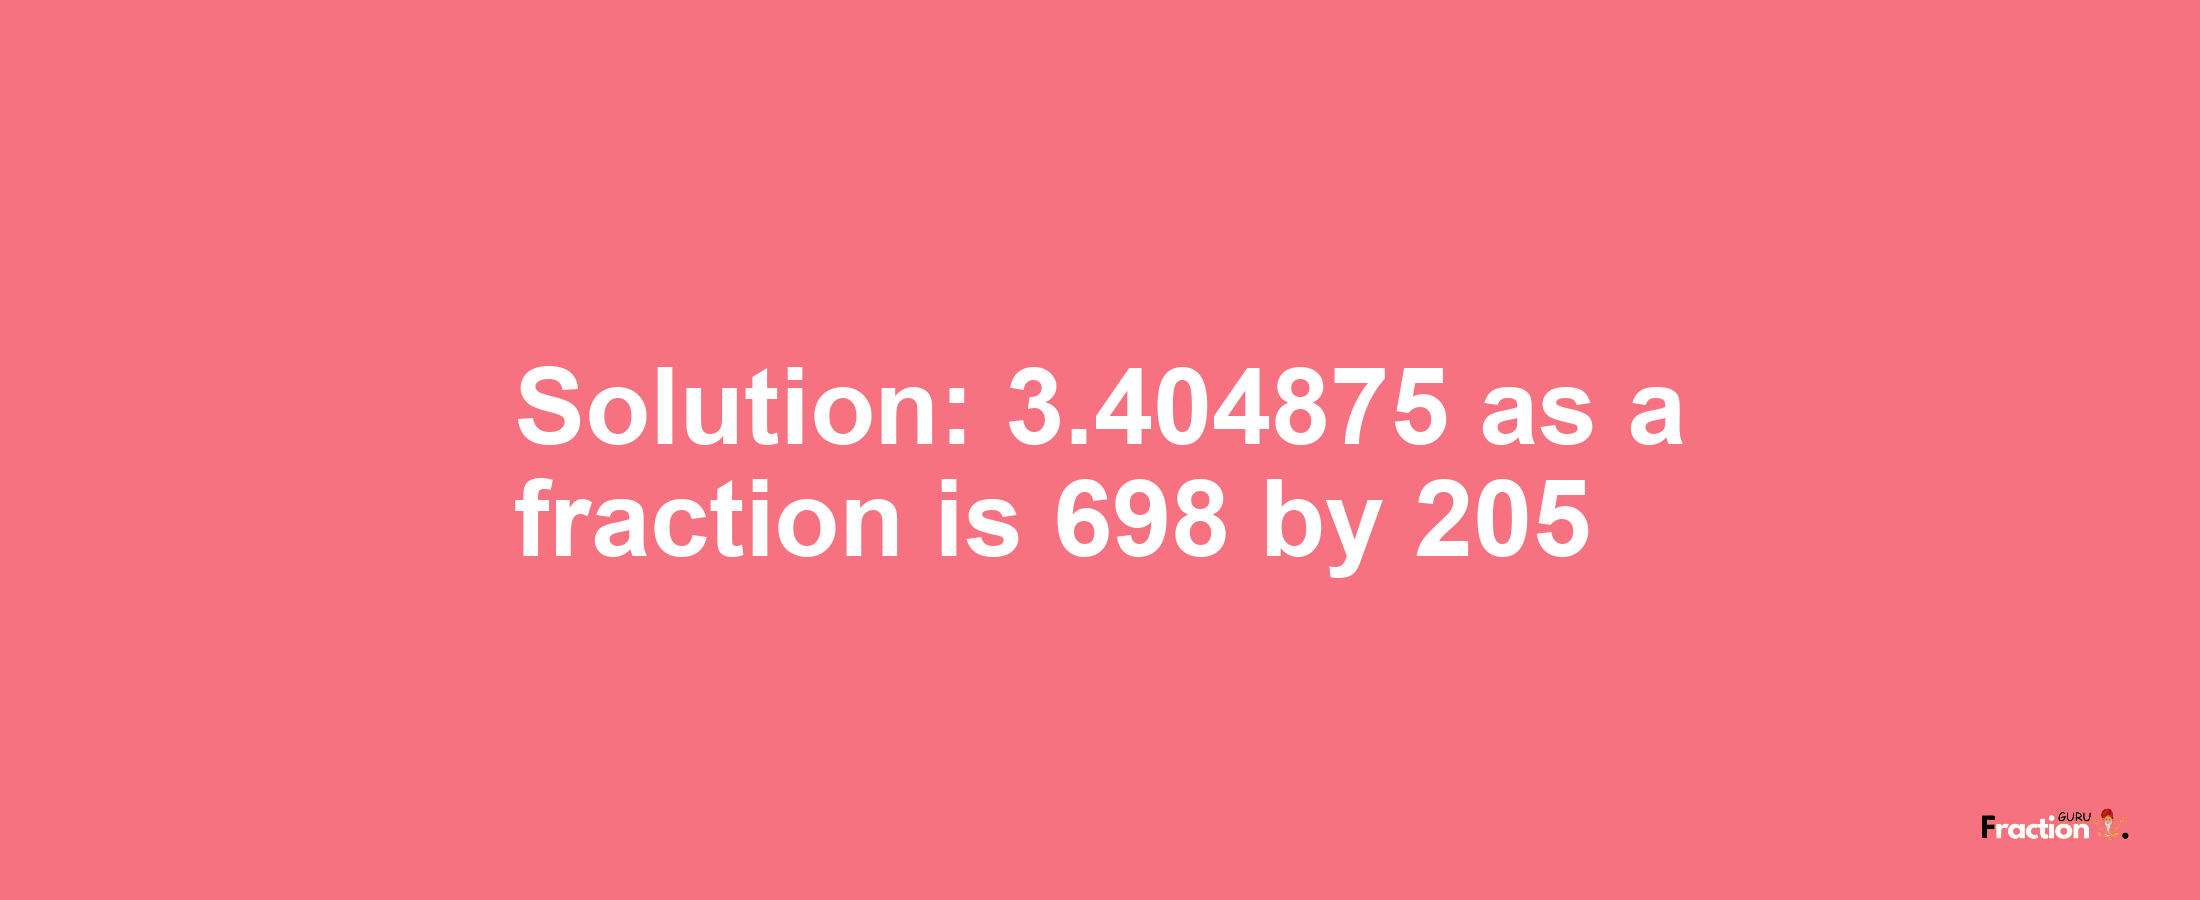 Solution:3.404875 as a fraction is 698/205